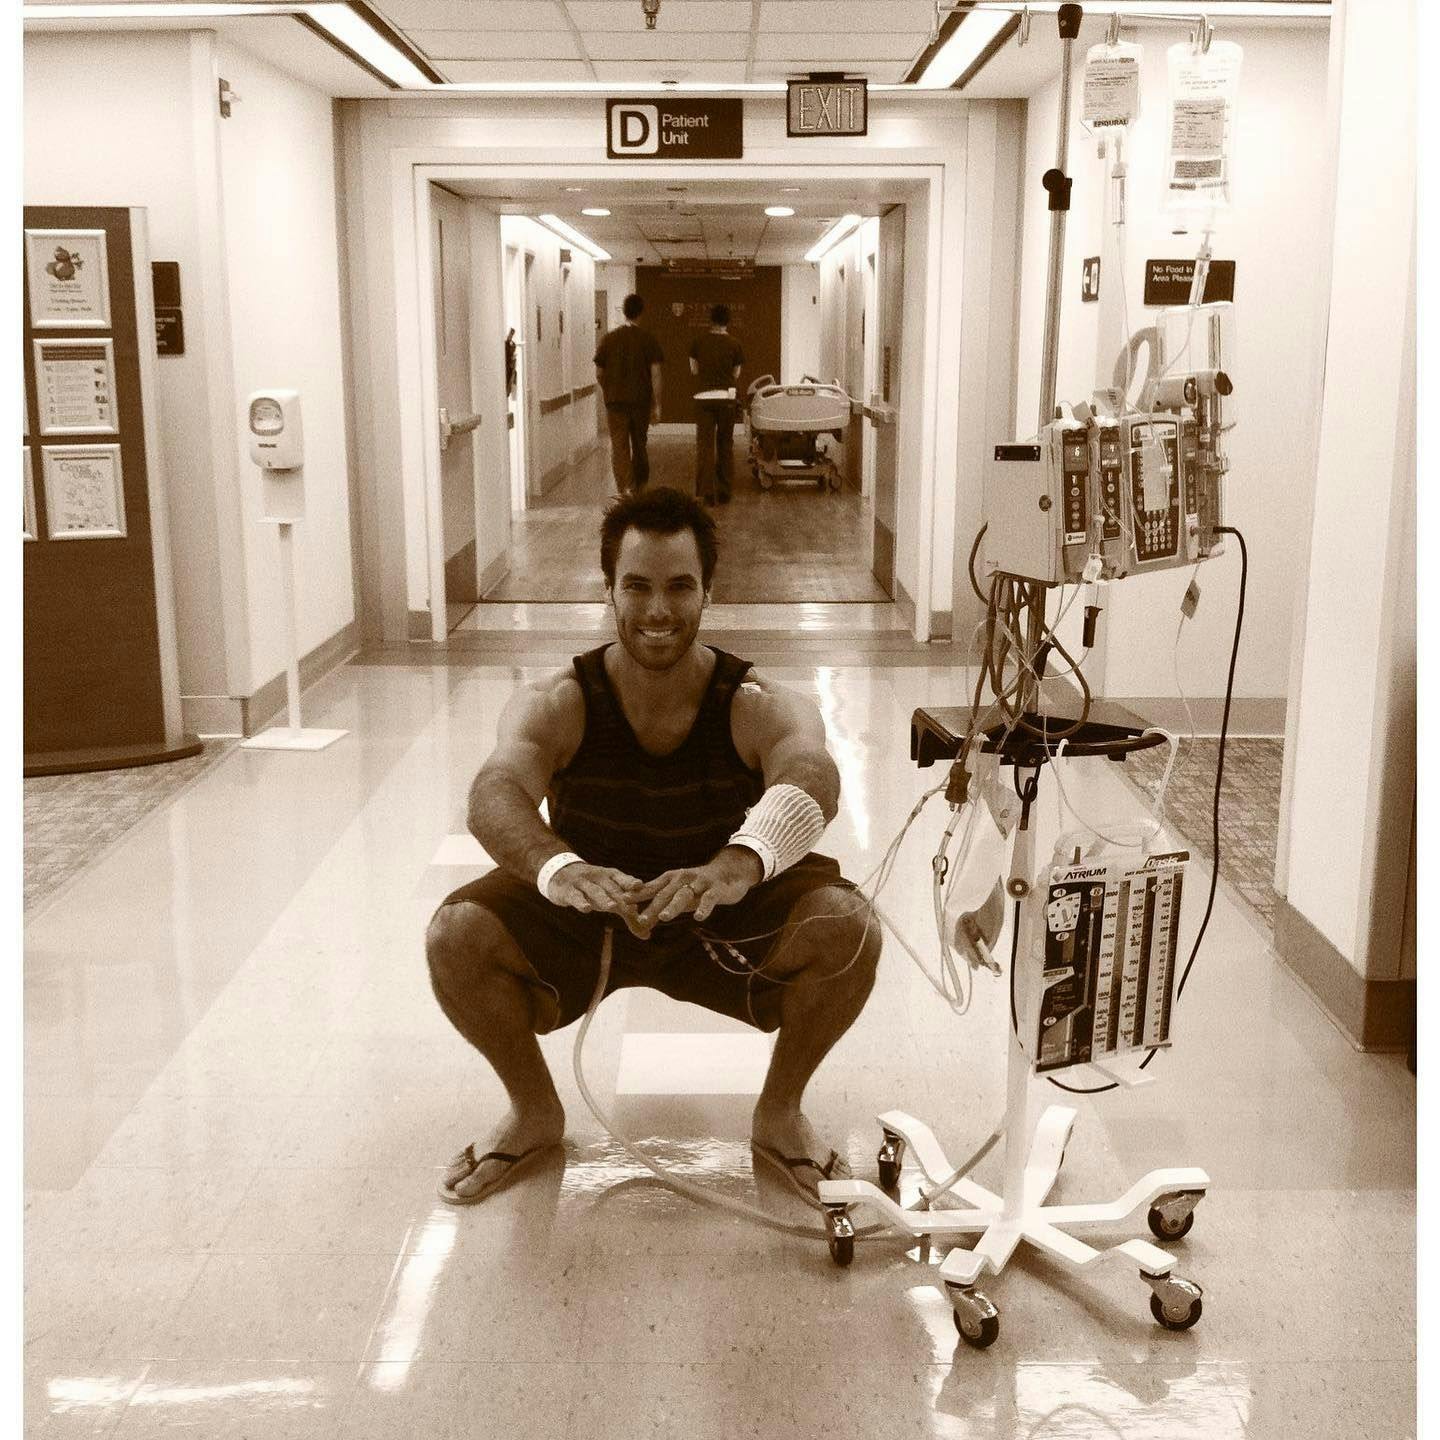 Rory Mckernan about two weeks after undergoing surgery on his lung, exercising in the hospital hallway